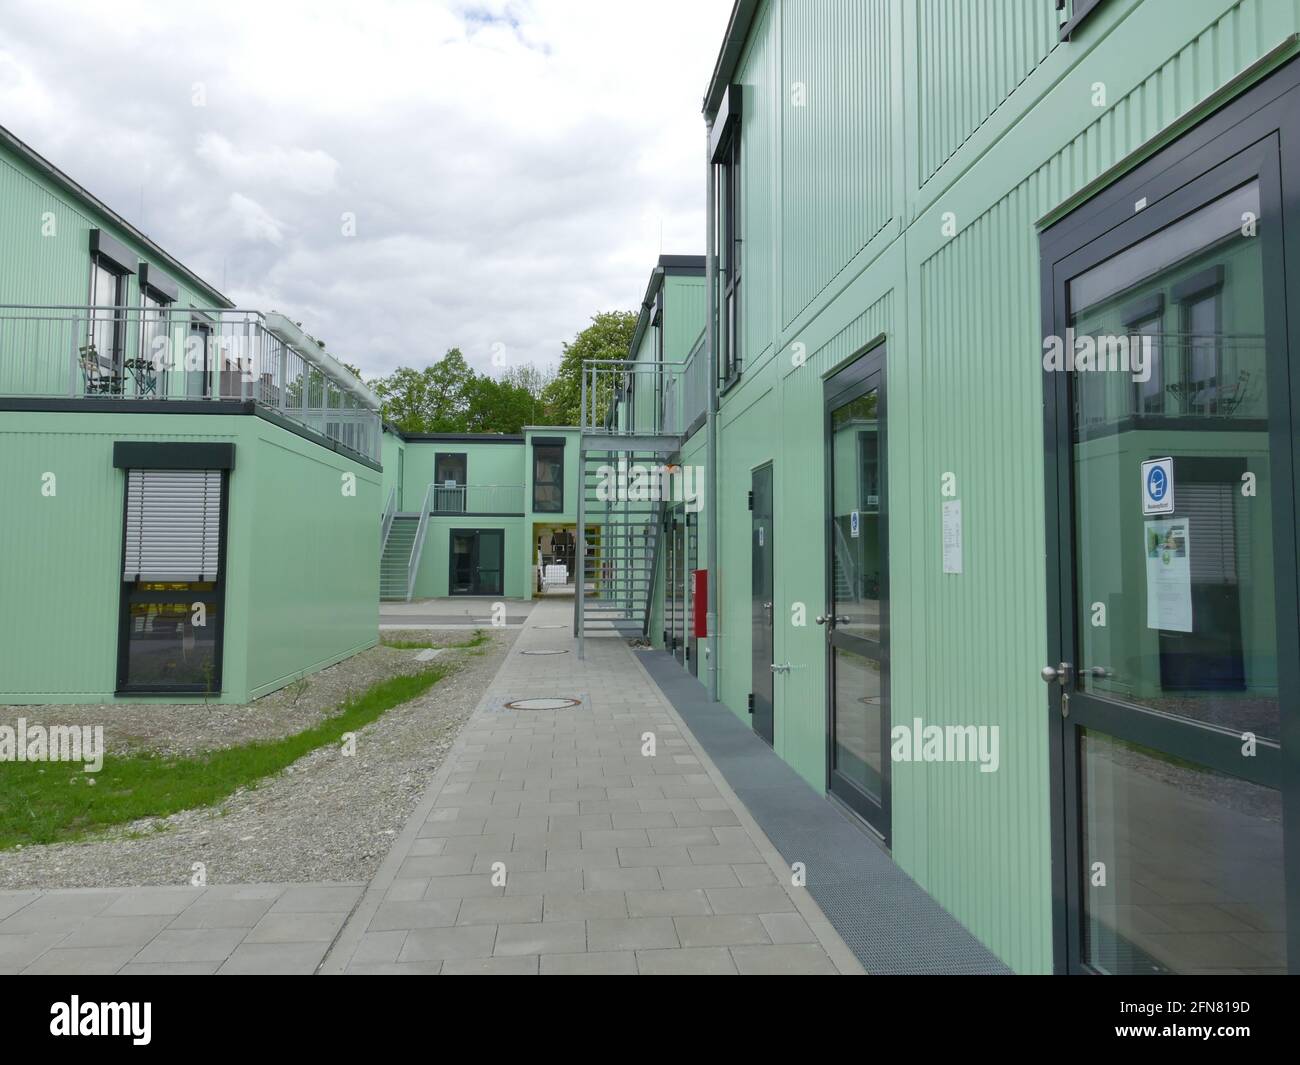 New Living Concept Flat Roofed Containerst Called Creative Quarter Living Space For Artists Musicians Etc Stock Photo Alamy